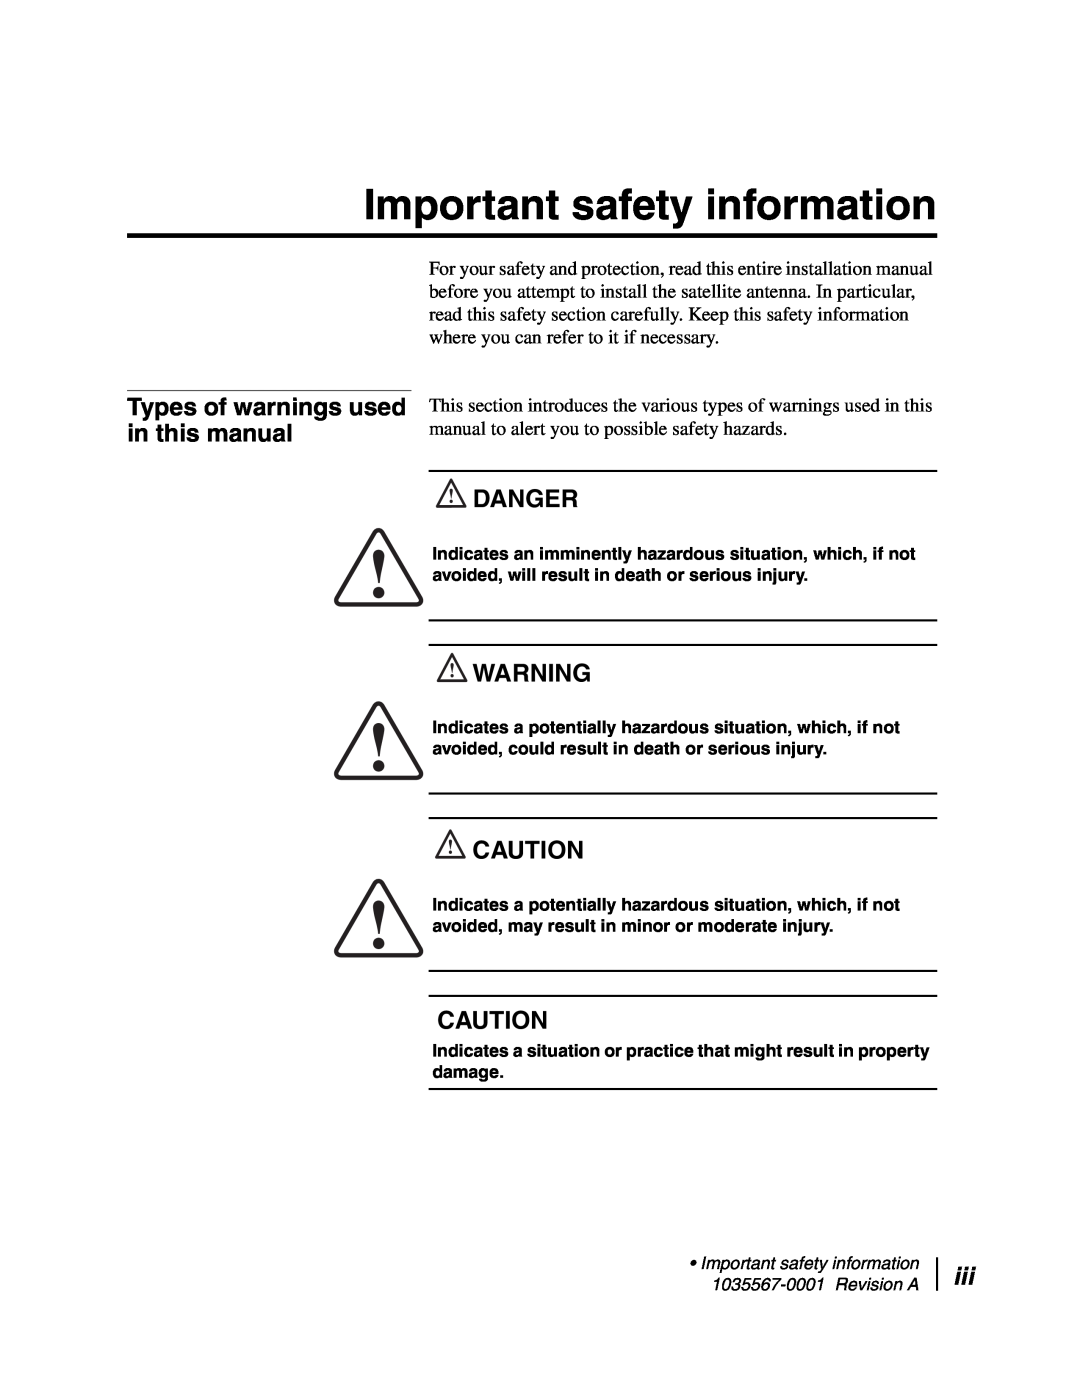 Hughes AN4-074-DF installation manual Important safety information, Types of warnings used in this manual, Danger 